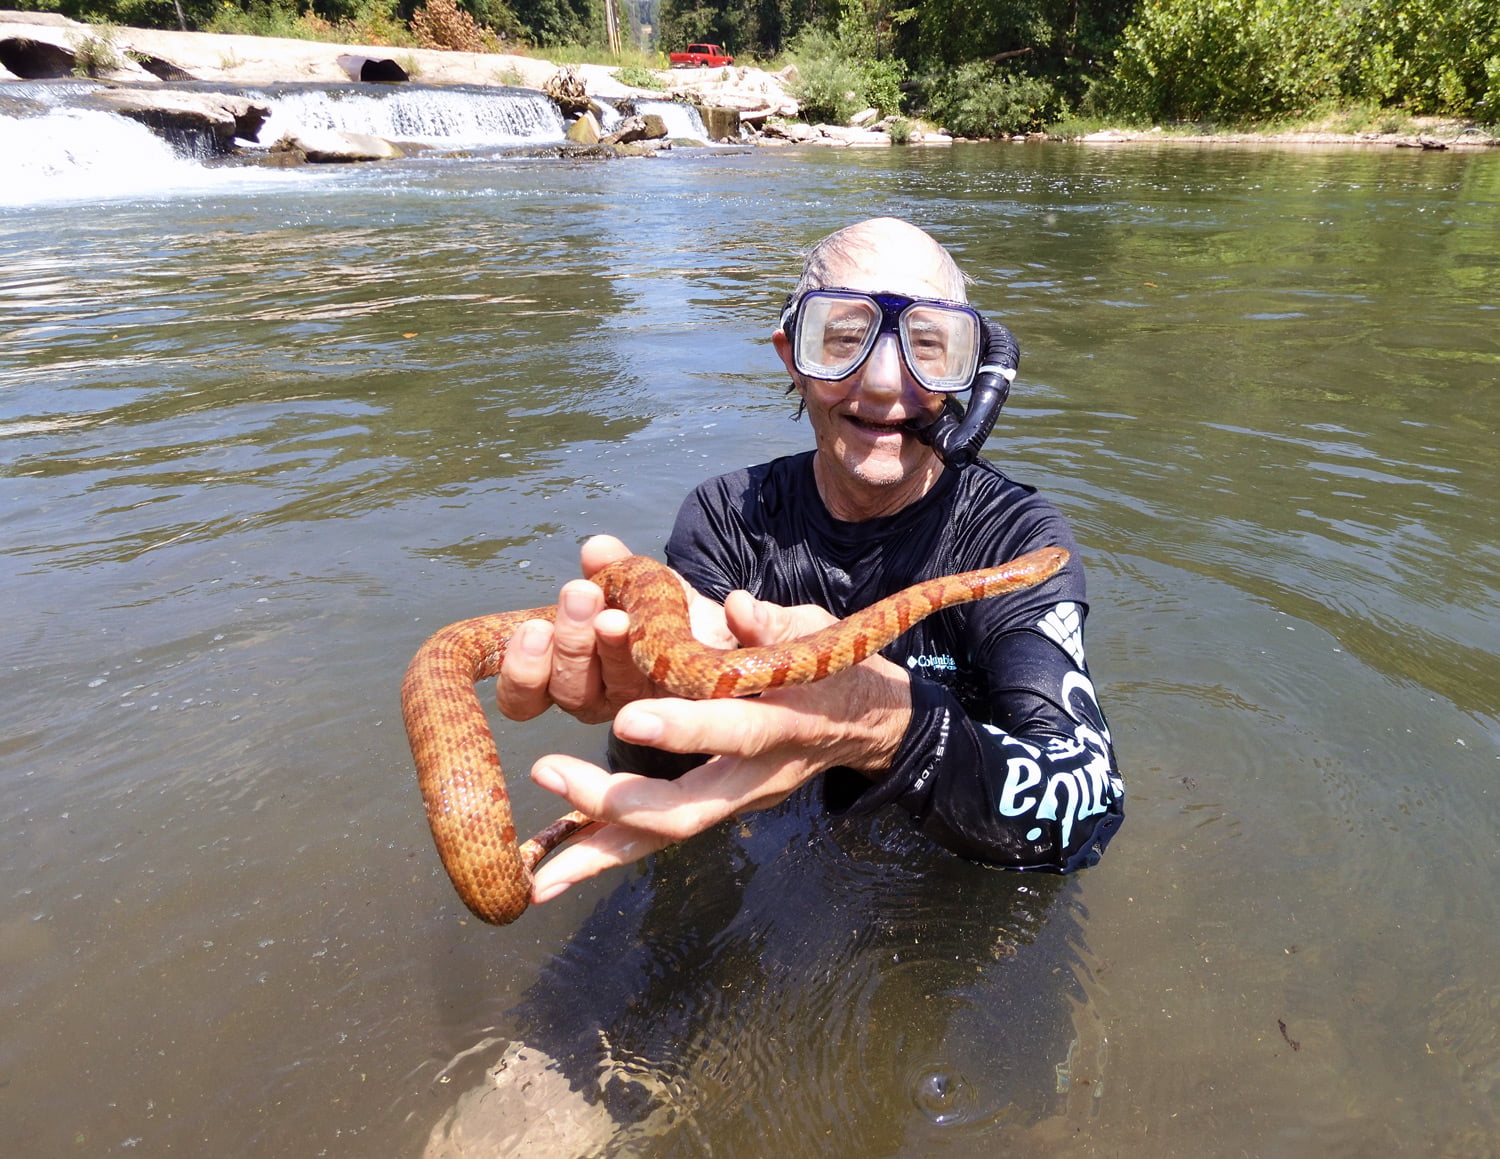 During an aquatic ecology trip to the Ozarks last August, Dr. Bill Beachly caught a snake – it’s not a venomous but a rare pigmentation called agouti.